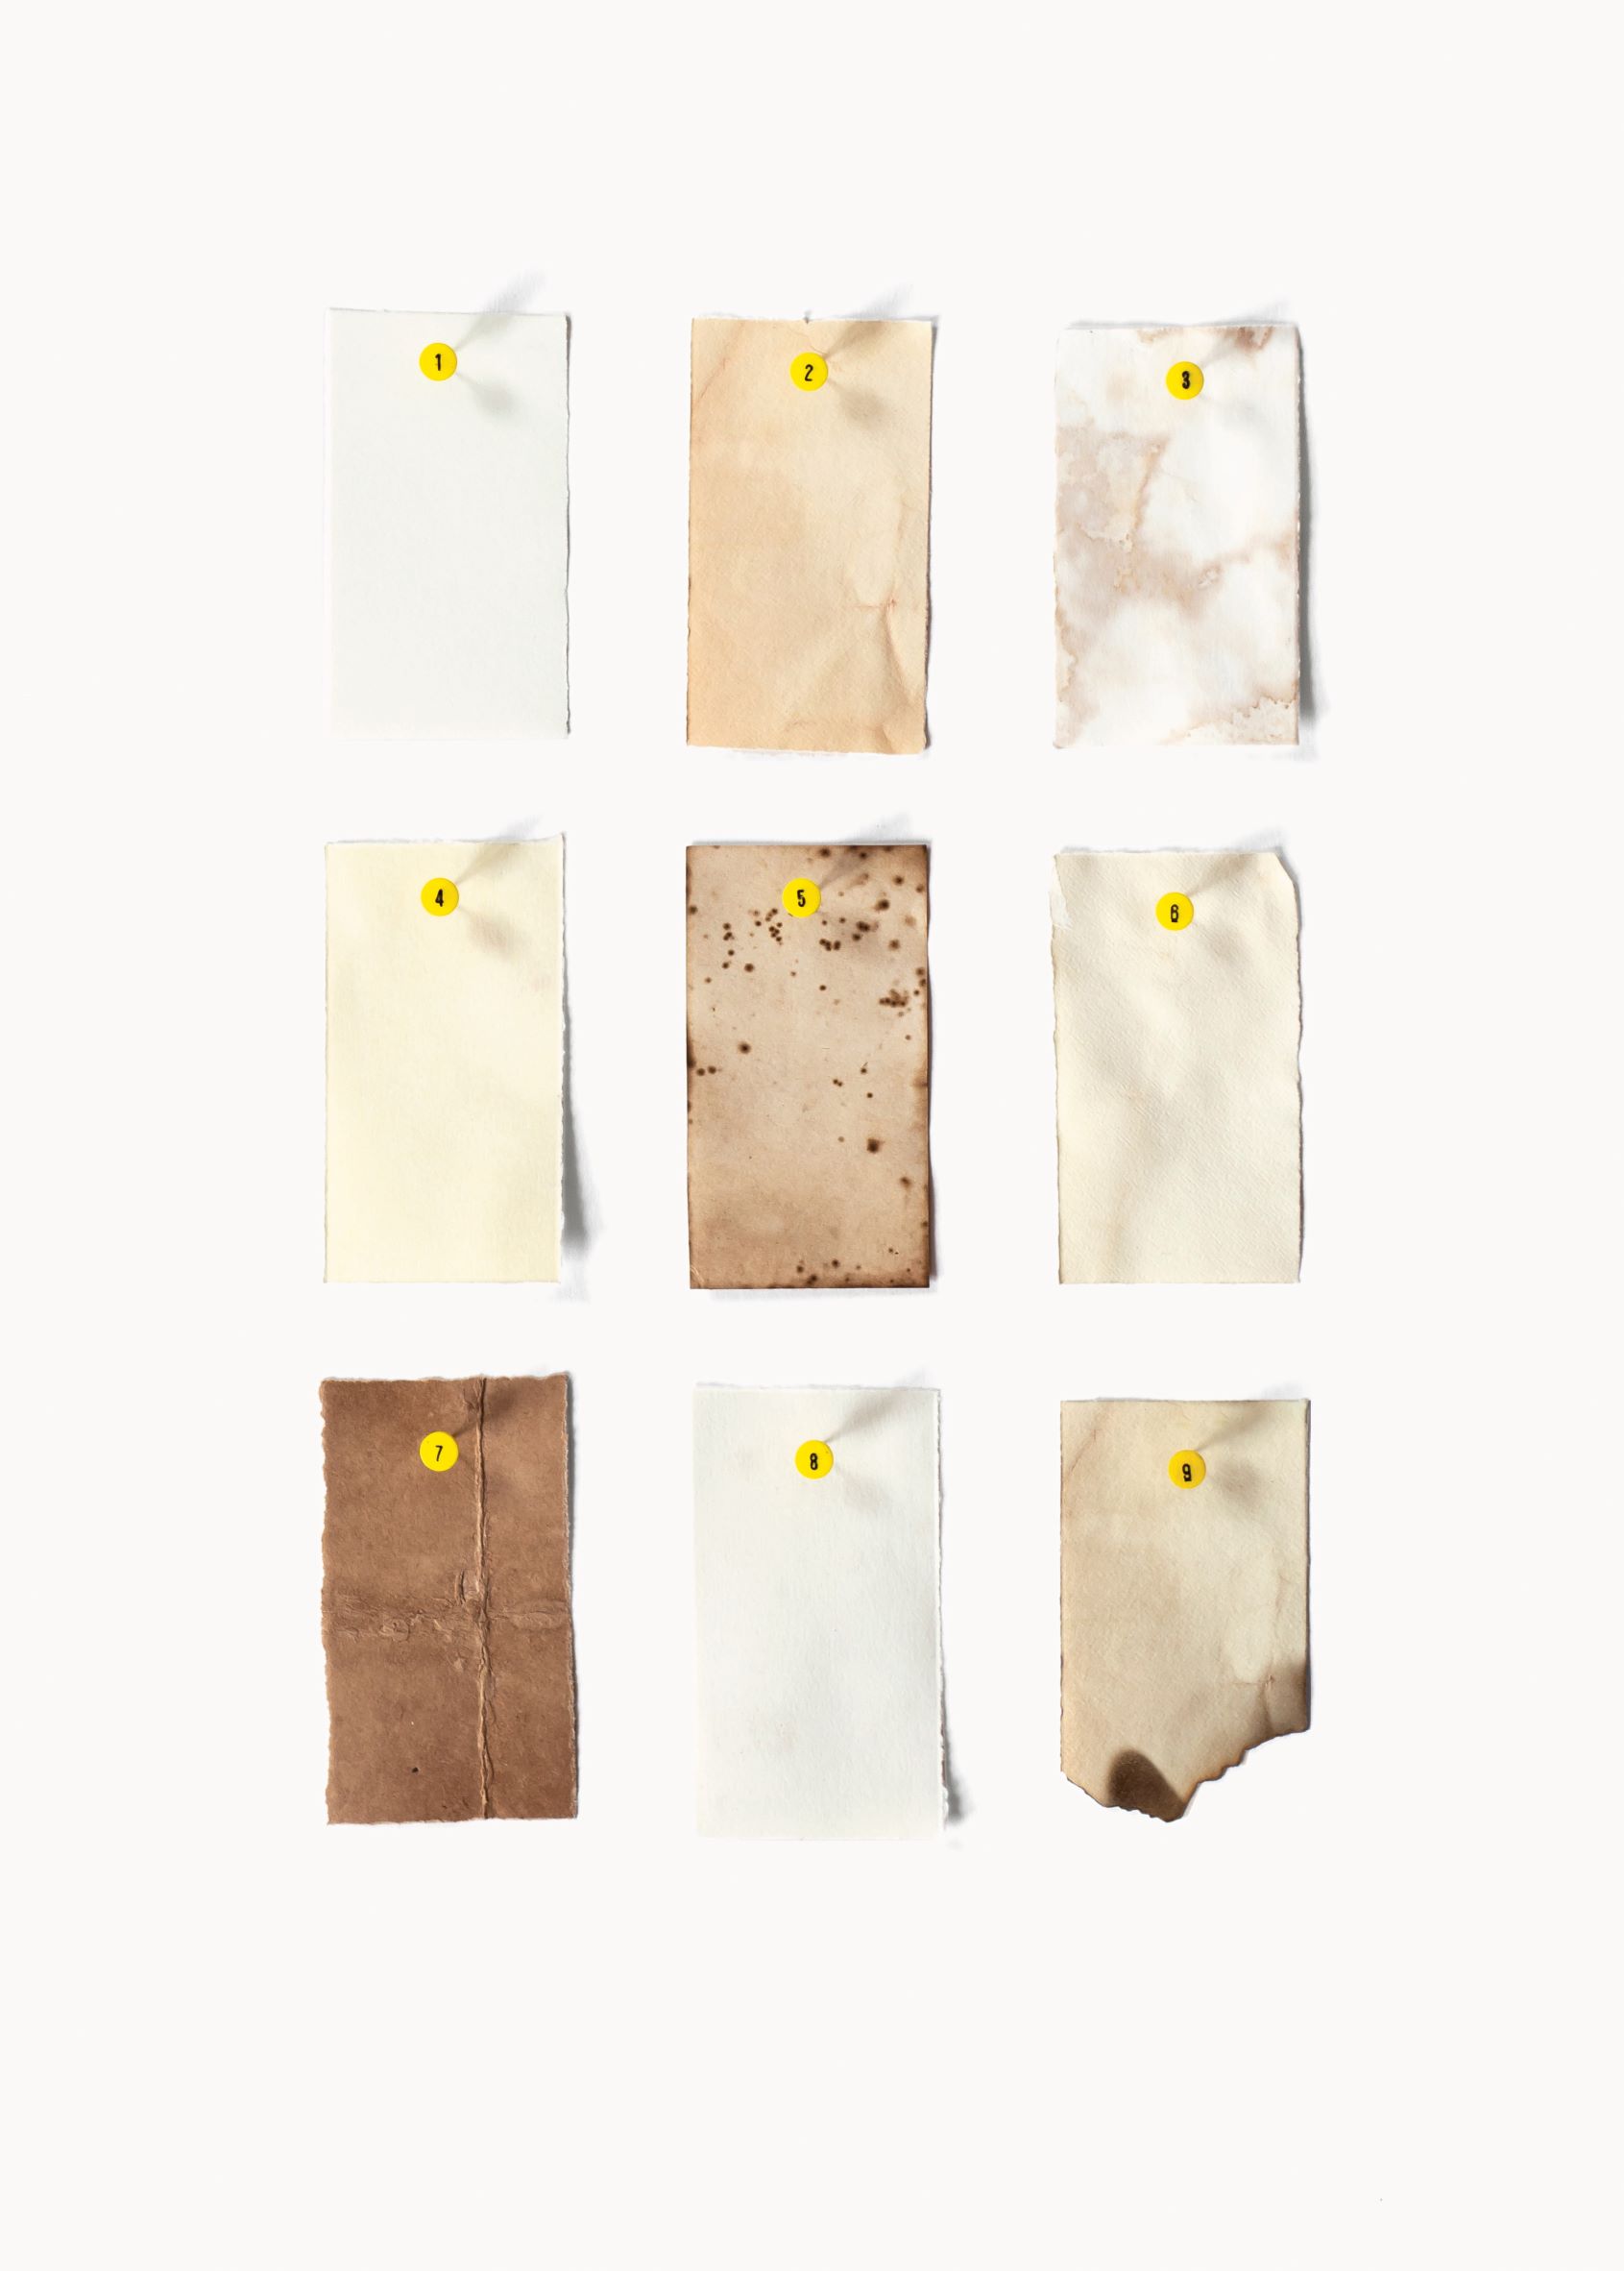 Staining and Aging Paper, photographs by Flora Fricker, collection of Annie Atkins. Left to right, top to bottom: (1) No aging (2) Tea (3) Bleach and lemon juice (4) Brasso Polish (5) Potassium permanganate crystals (6) Coffee (7) Balsamic vinegar, cooked in the oven for ten minutes (8) Red wine vinegar (9) Burnt with match 